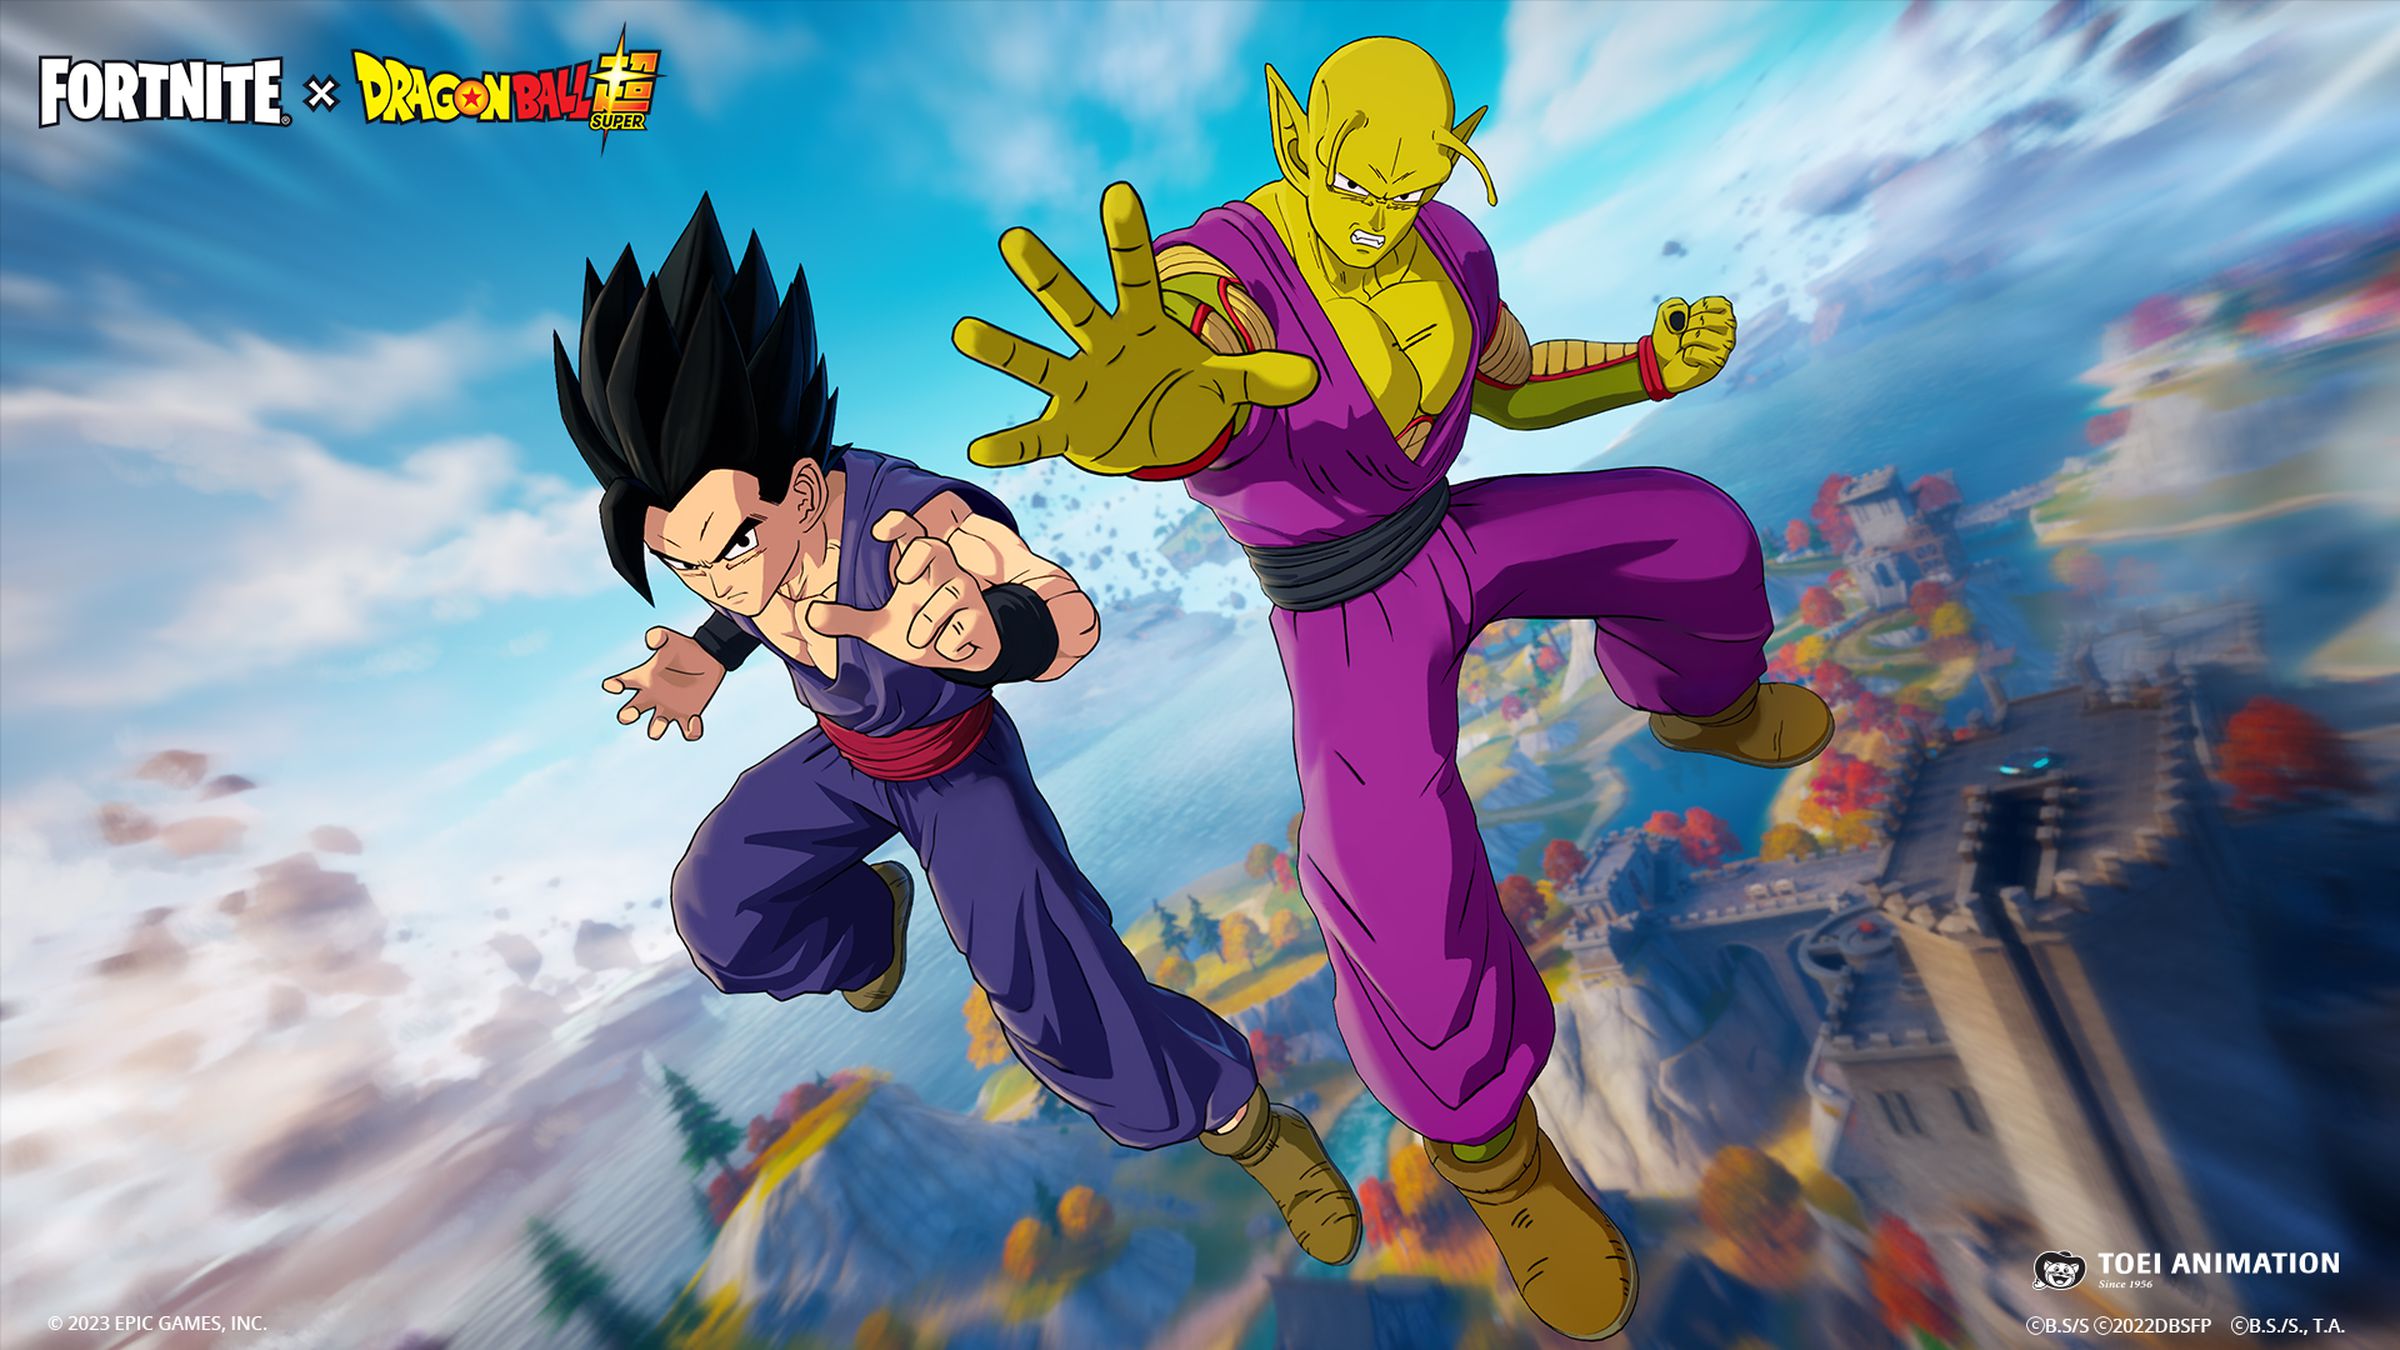 Fortnite promotional art of Gohan and Piccolo.